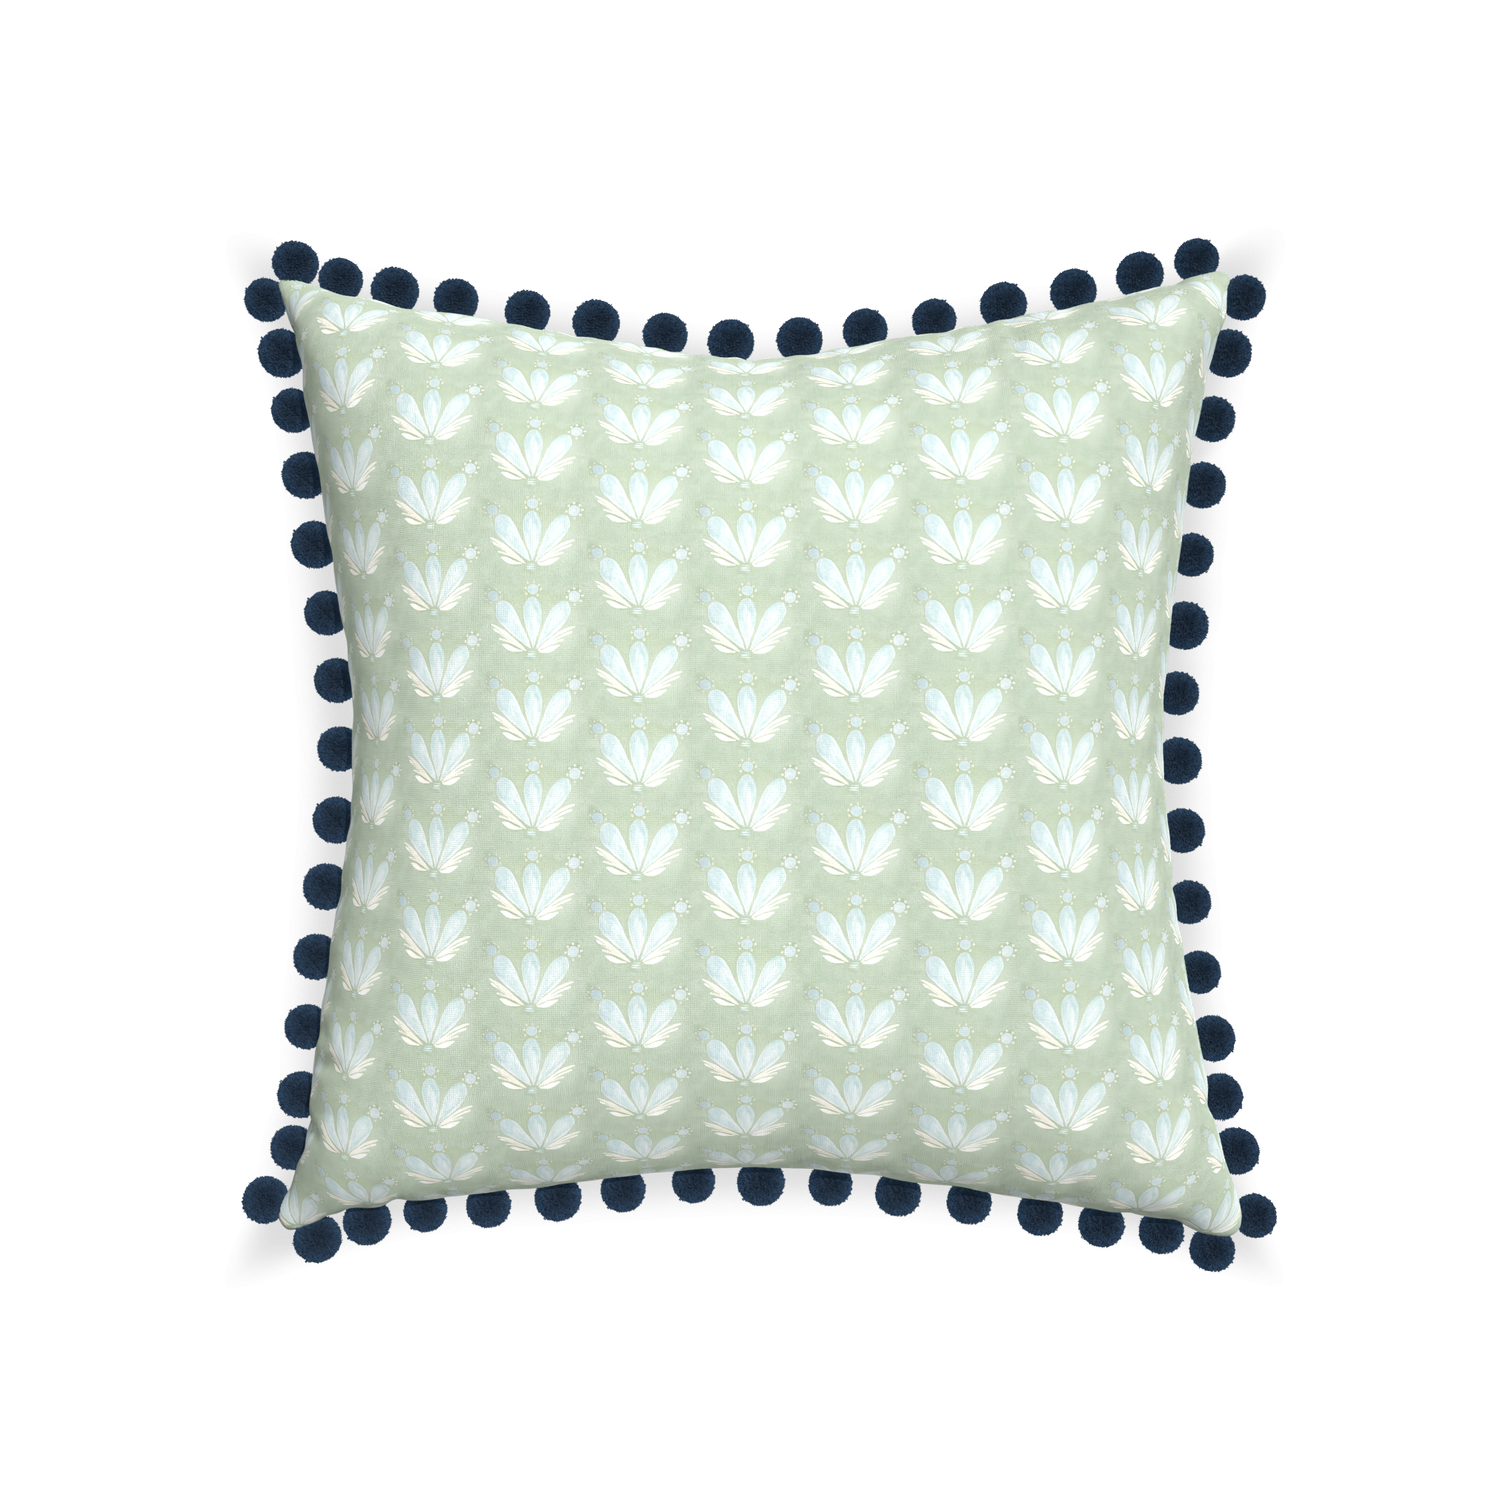 22-square serena sea salt custom blue & green floral drop repeatpillow with c on white background